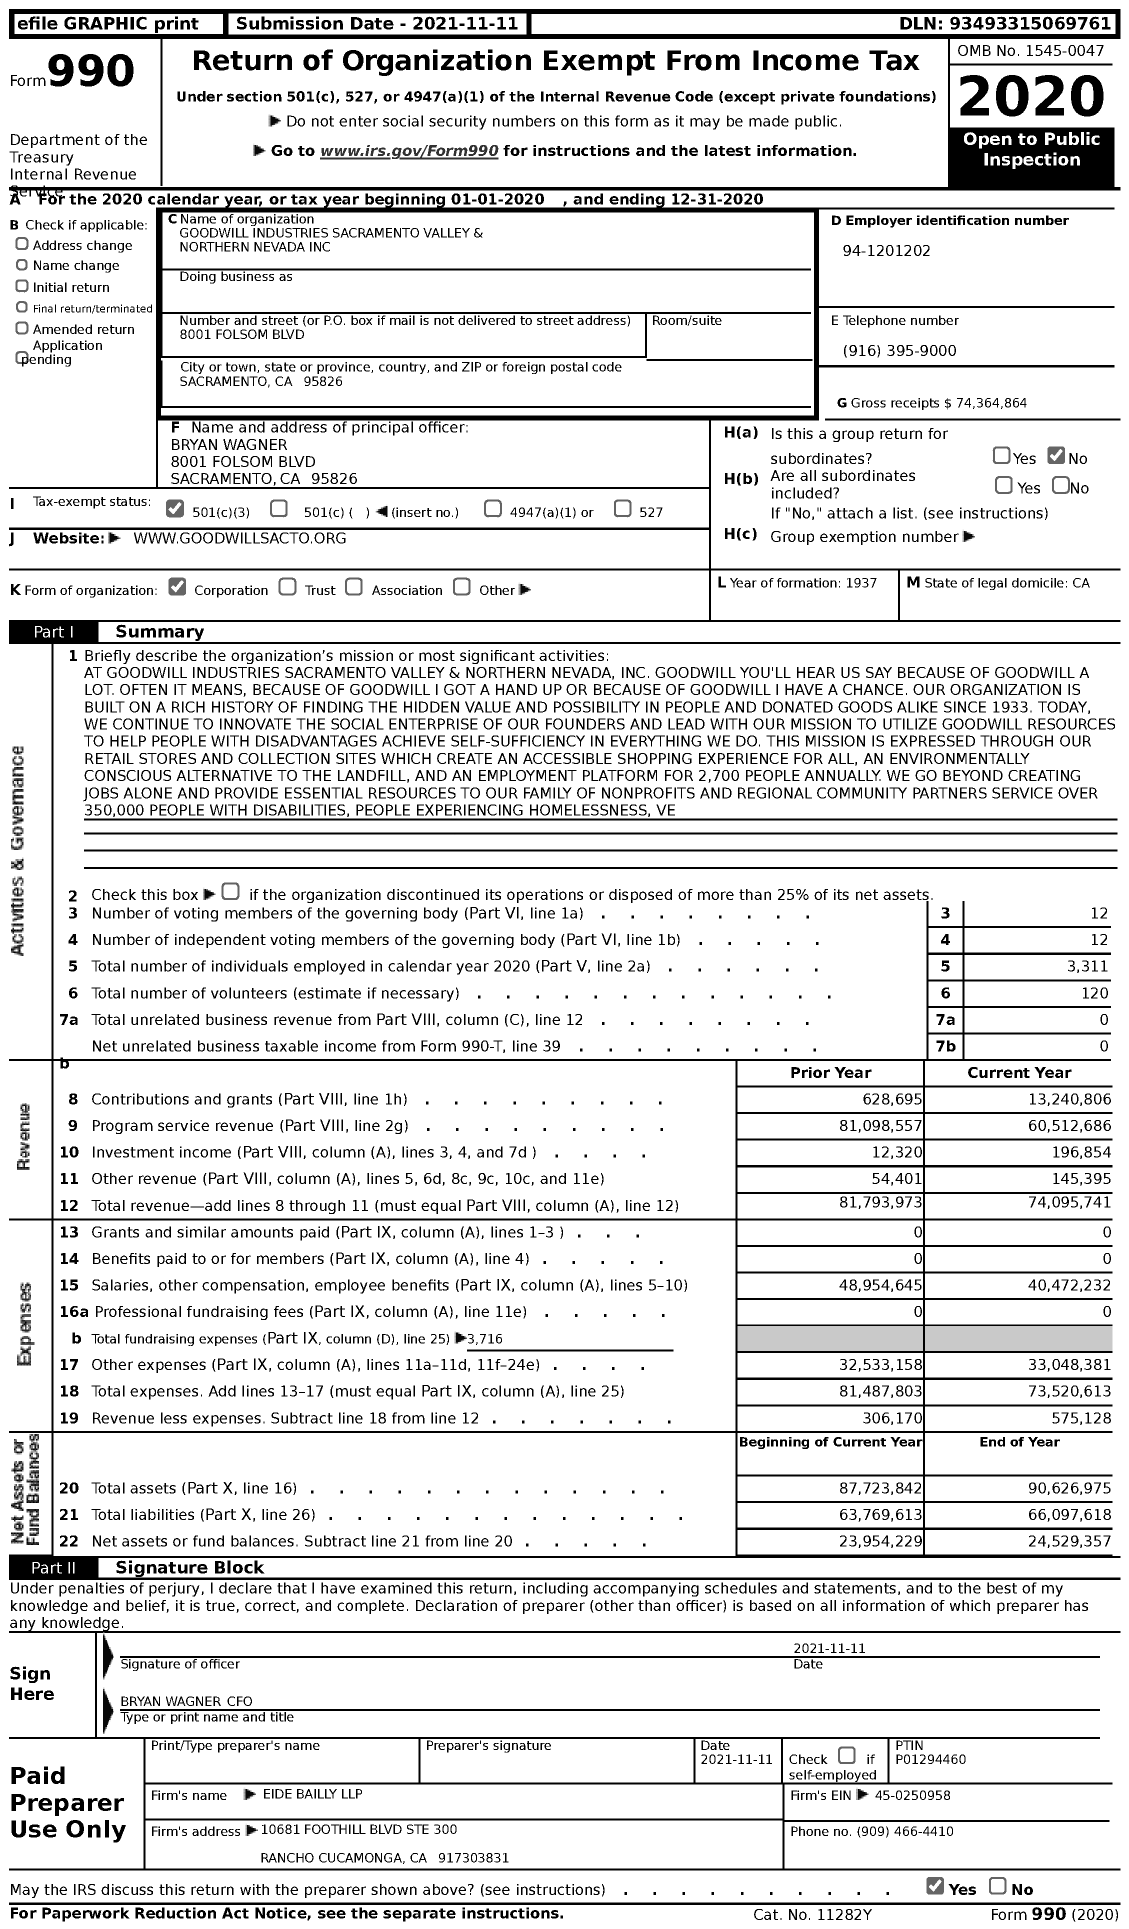 Image of first page of 2020 Form 990 for Goodwill Industries Sacramento Valley and Northern Nevada